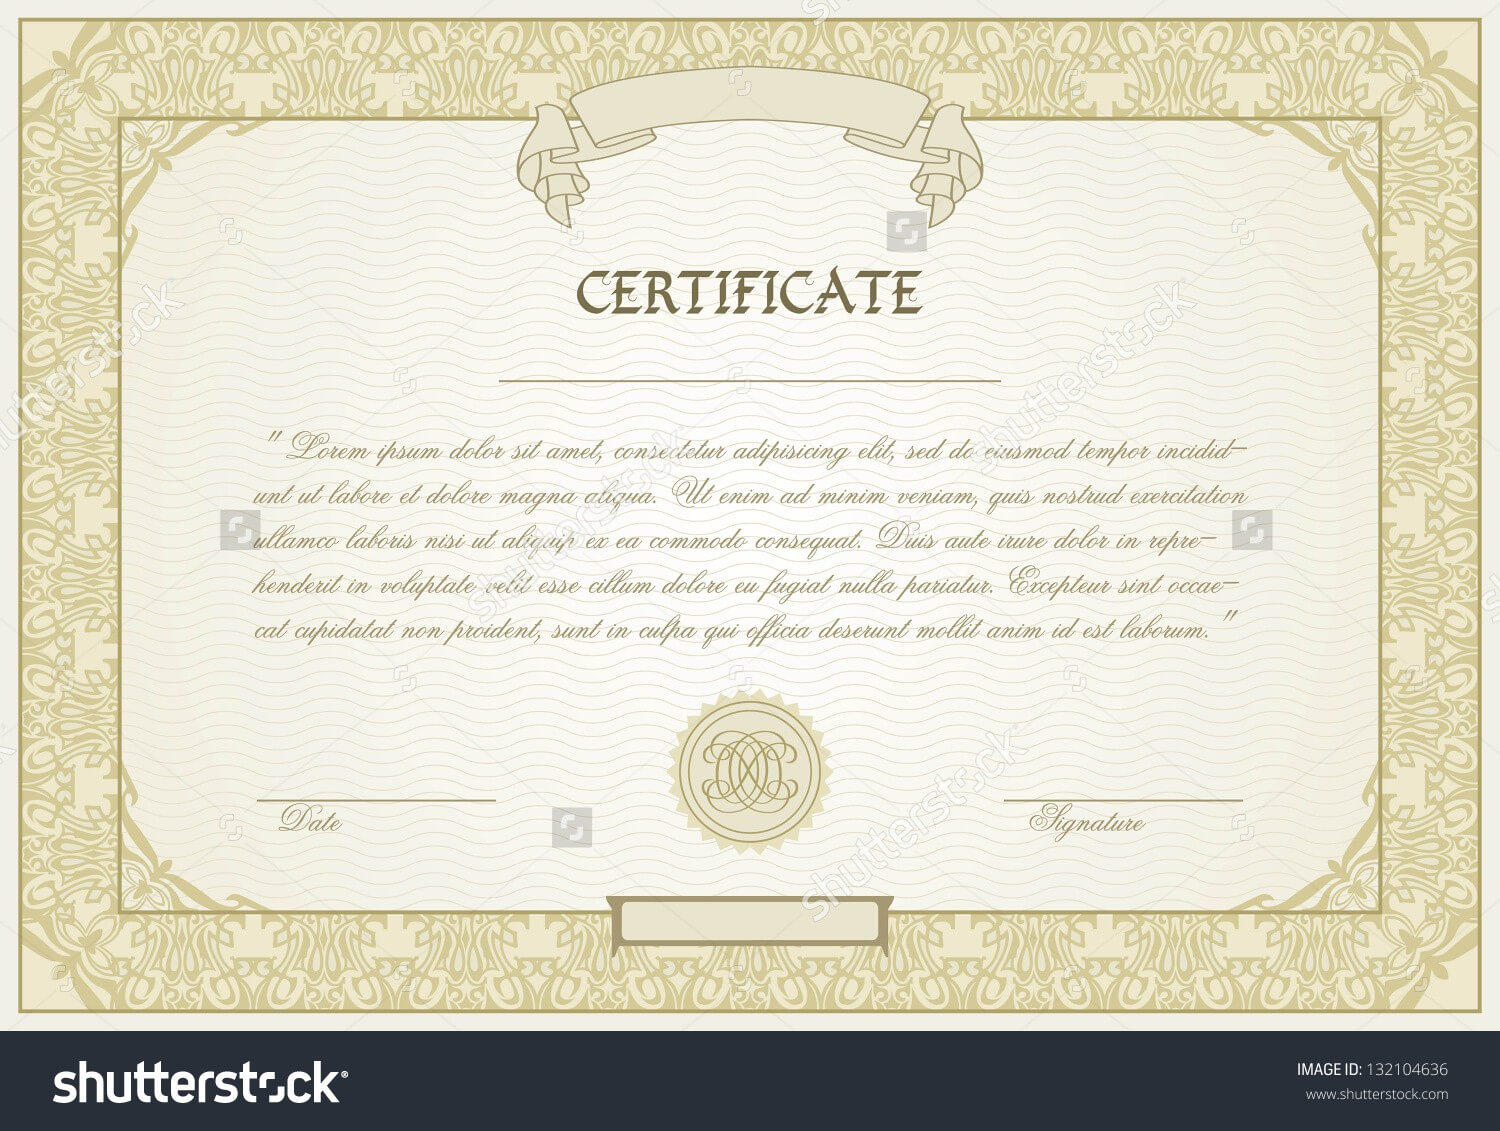 Brilliant Ideas Of Sample Award Certificate Wording For Your Pertaining To Long Service Certificate Template Sample